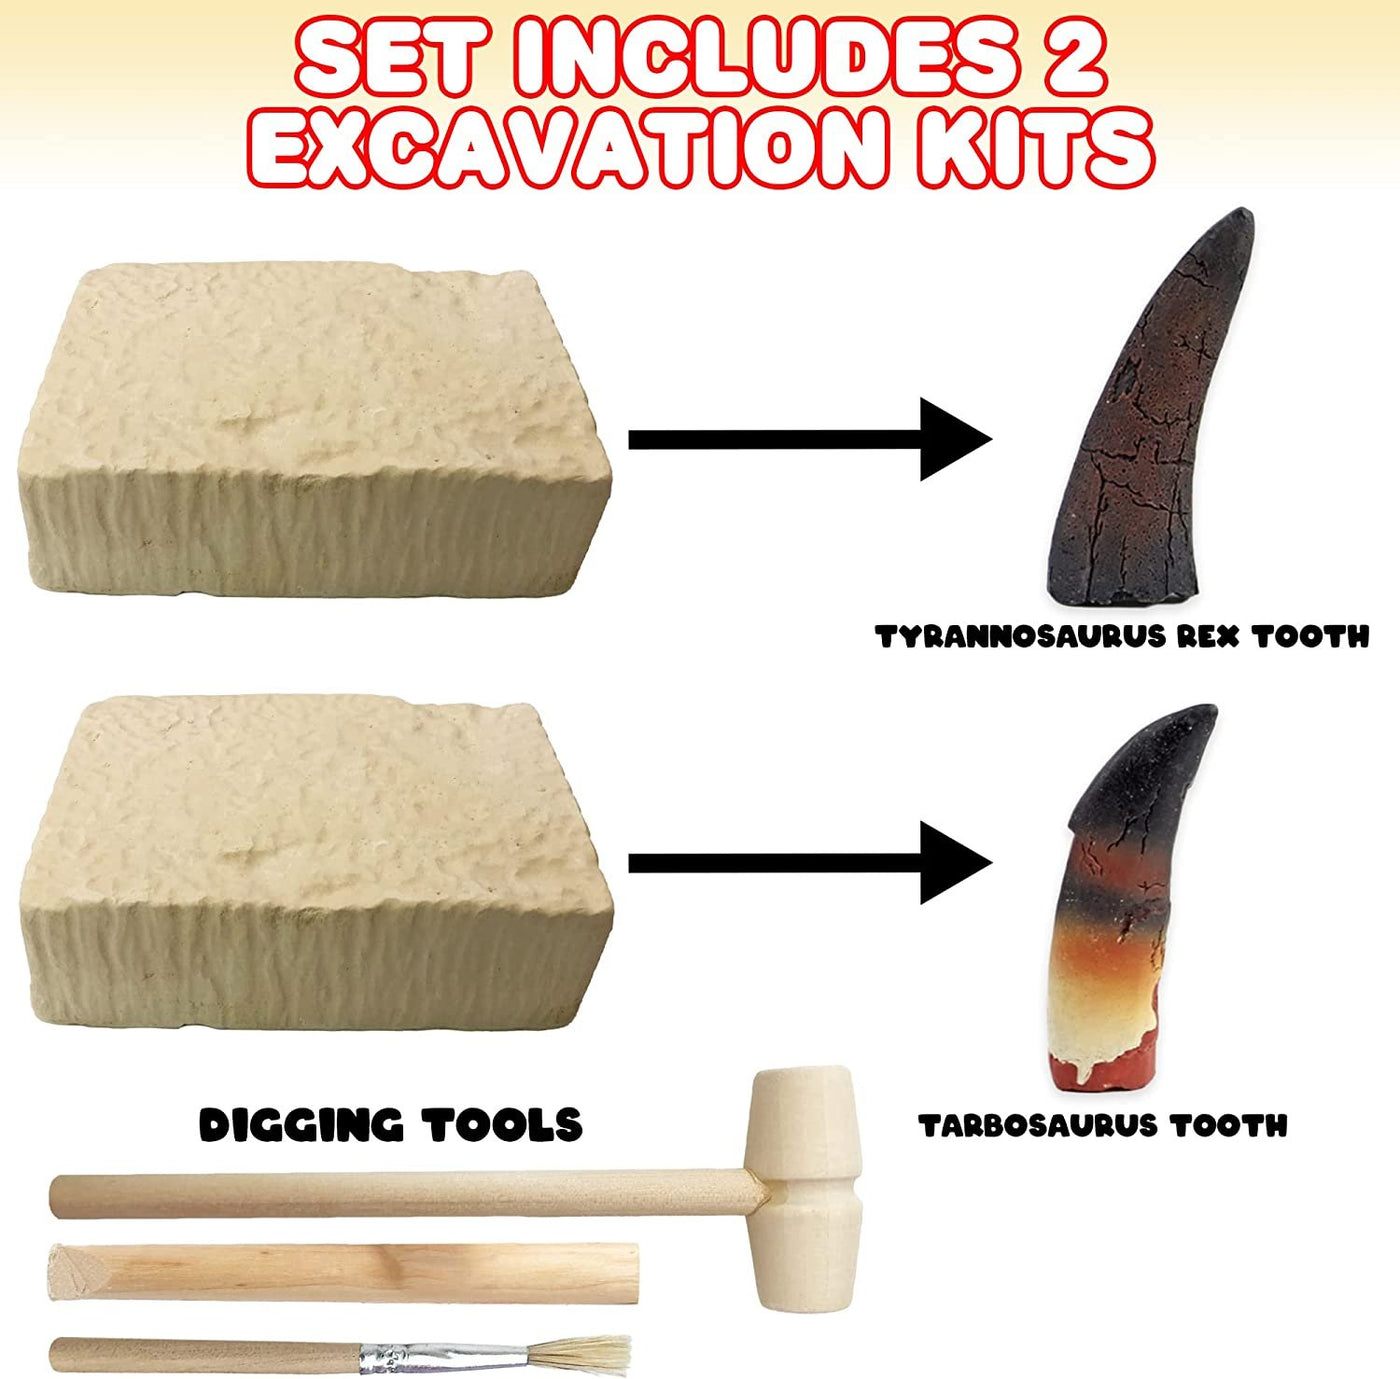 Dino Teeth Dig and Discover Excavation Kit for Kids, Includes T-rex and Tarbosaurus Toy Fossil Teeth with 2 Digging Tools, Interactive Dinosaur Gifts for Boys and Girls